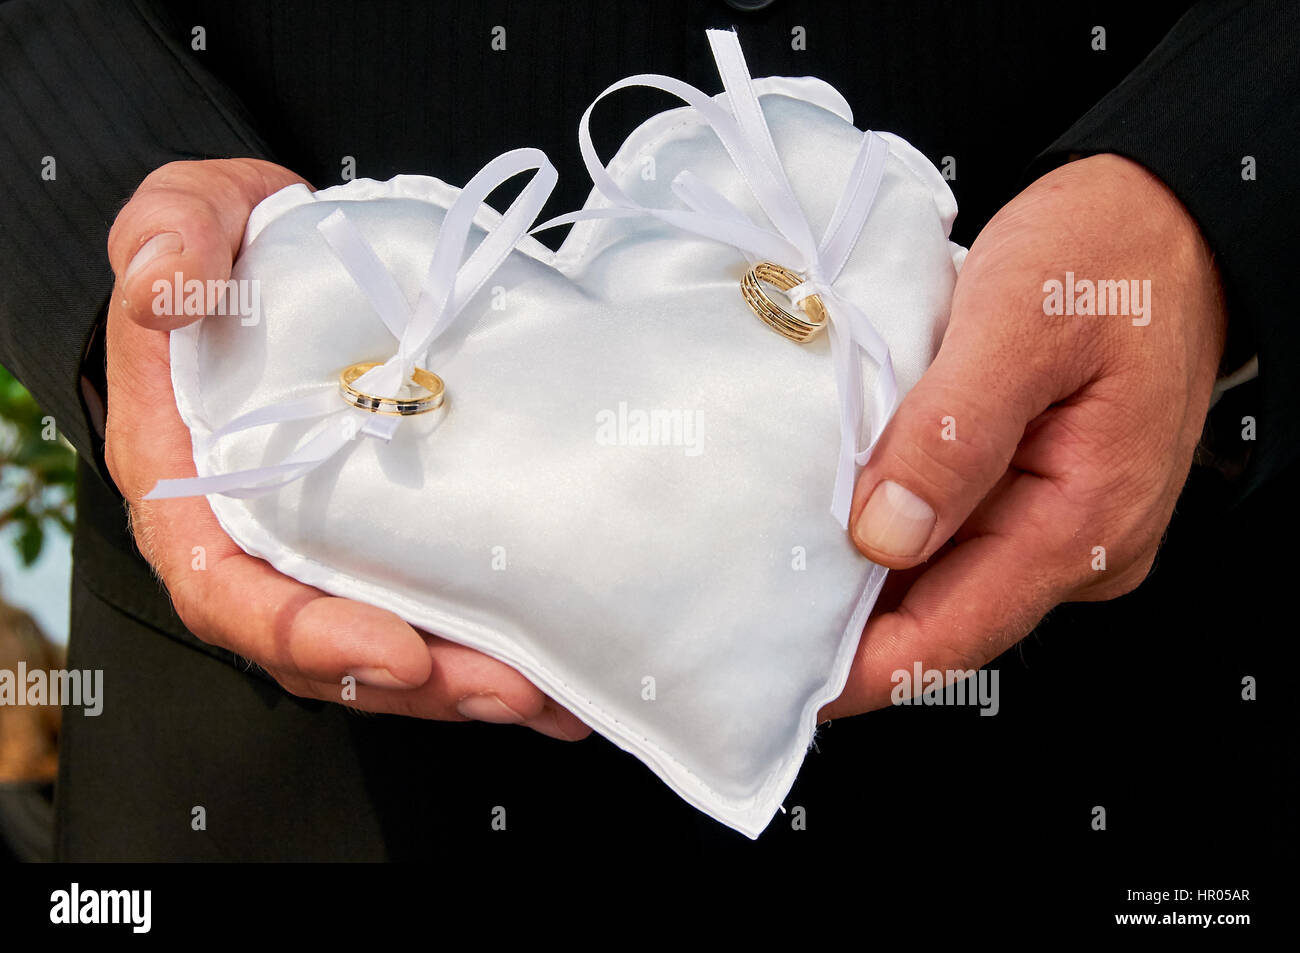 Premium Photo | Wedding rings on a small pillow at a marriage ceremony idea  for event agencies